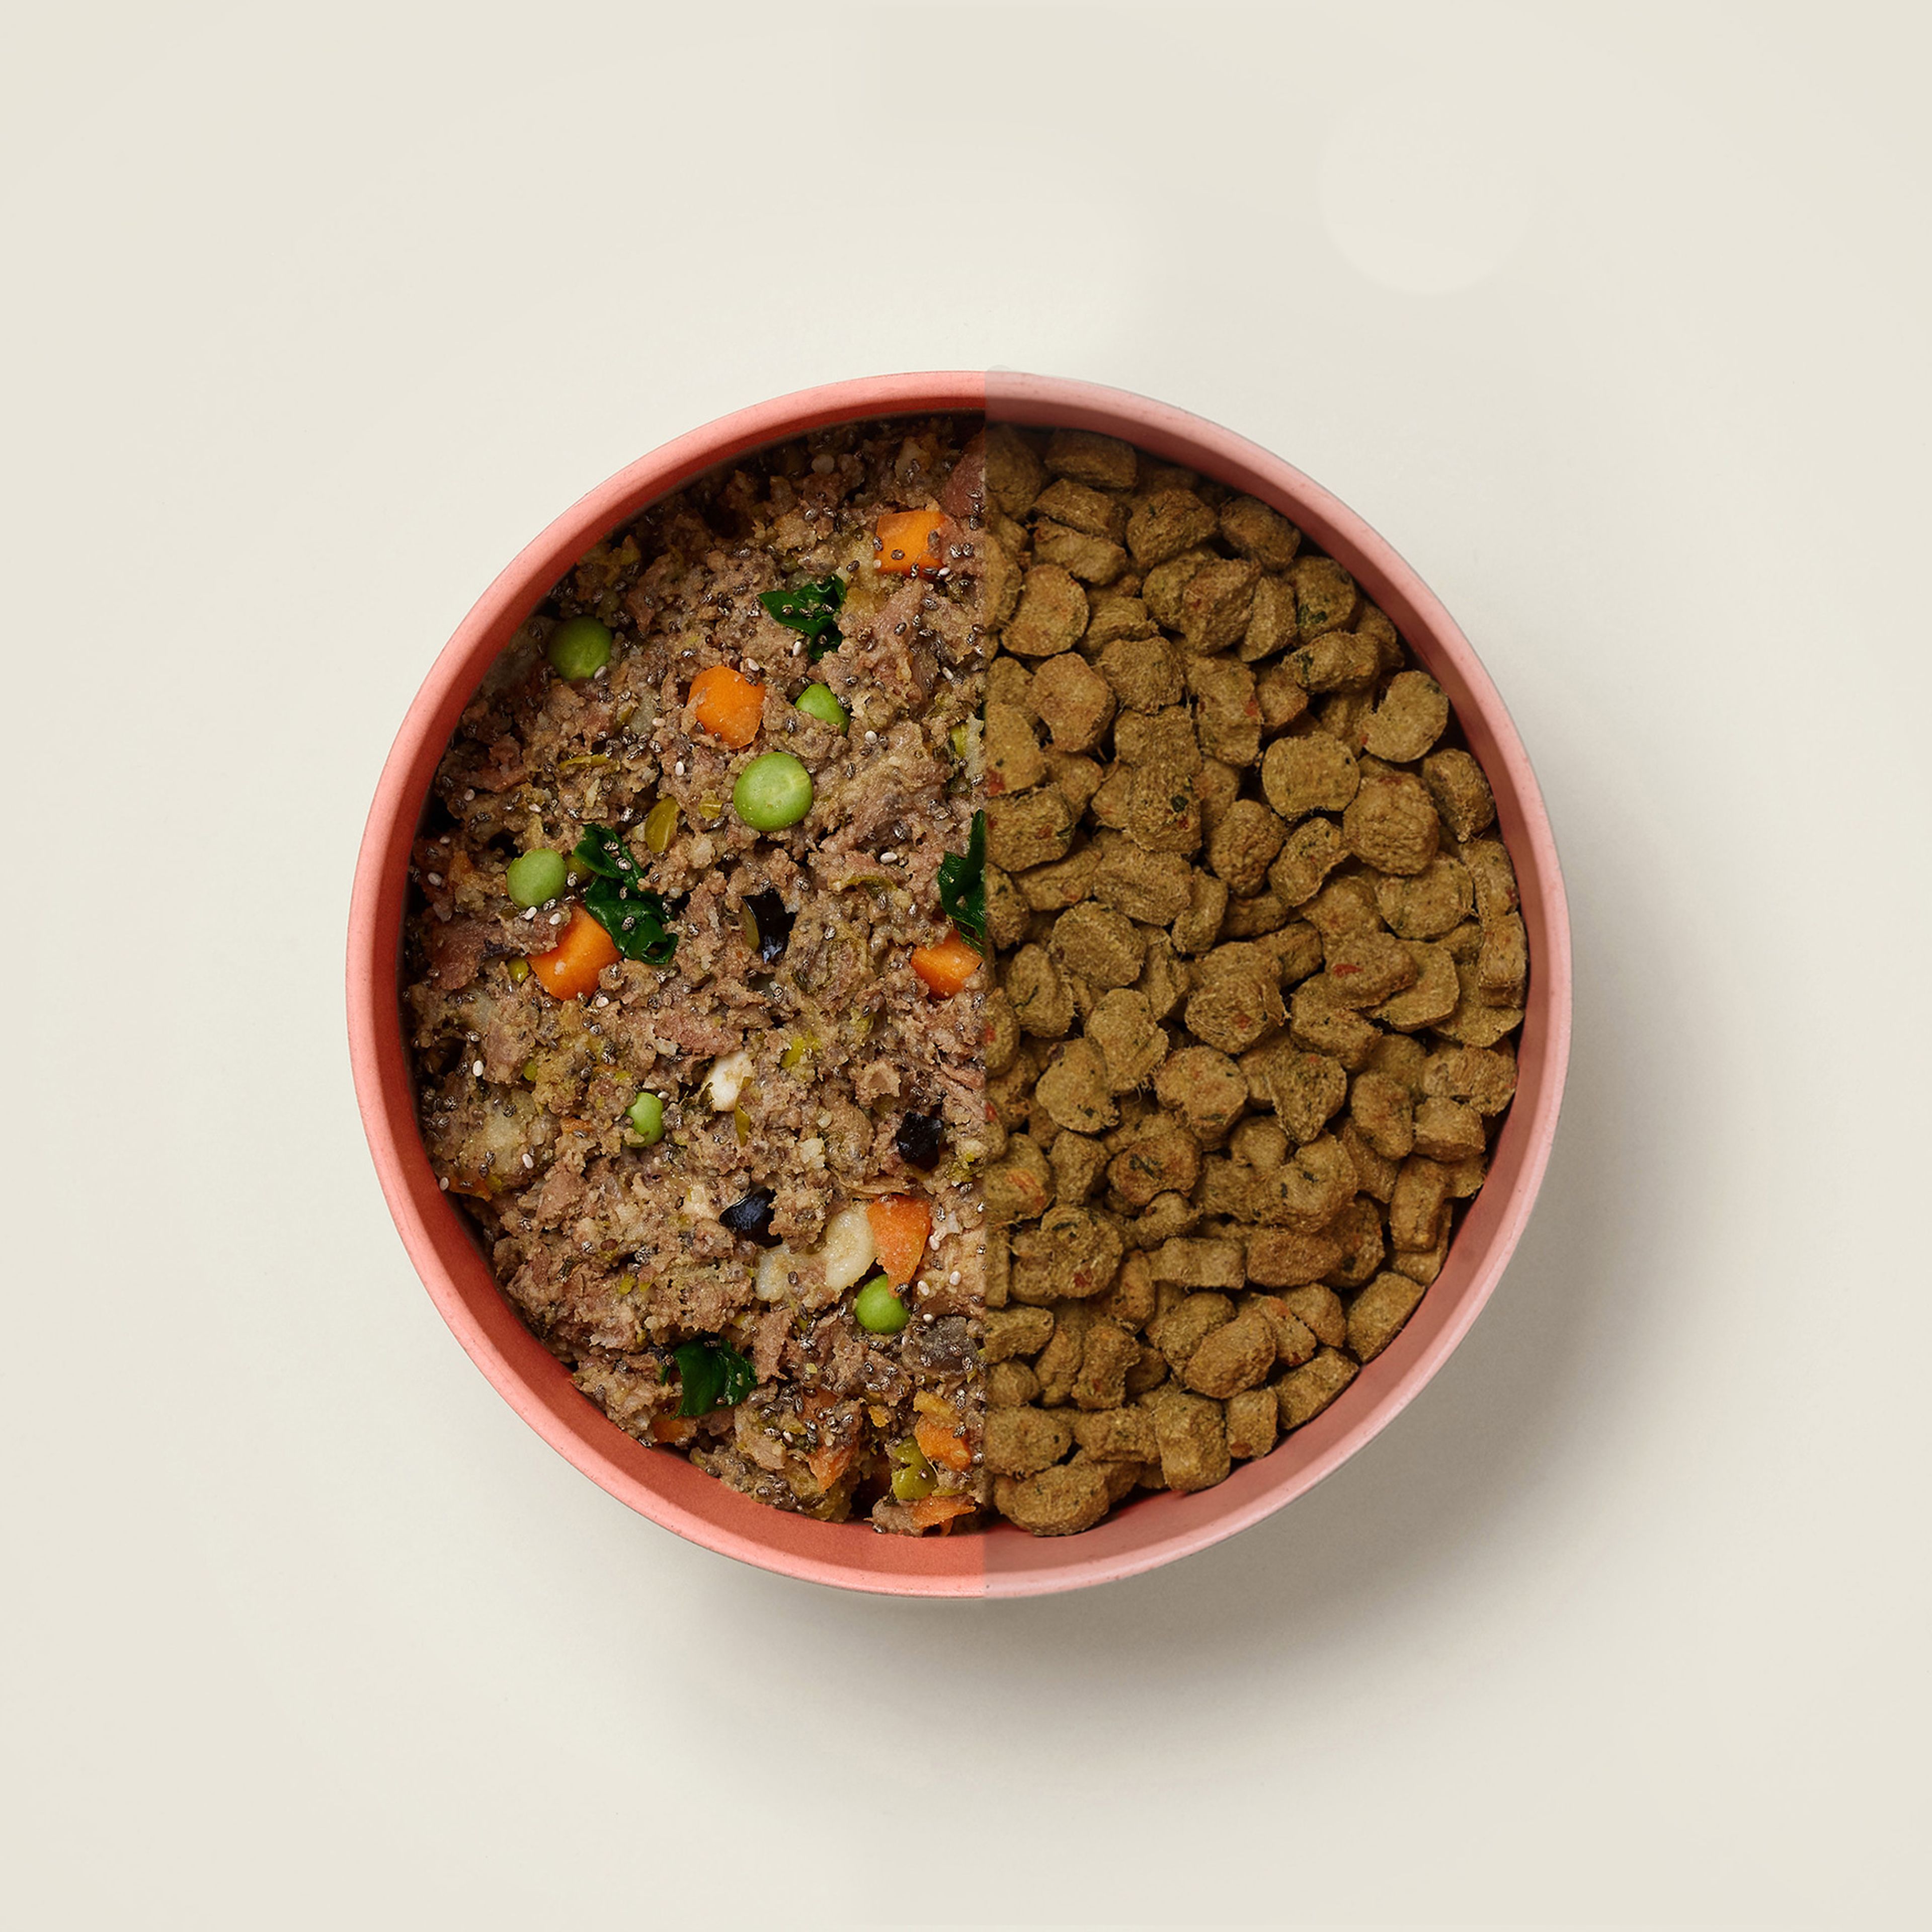 Ollie mixed bowl with fresh beef and baked beef